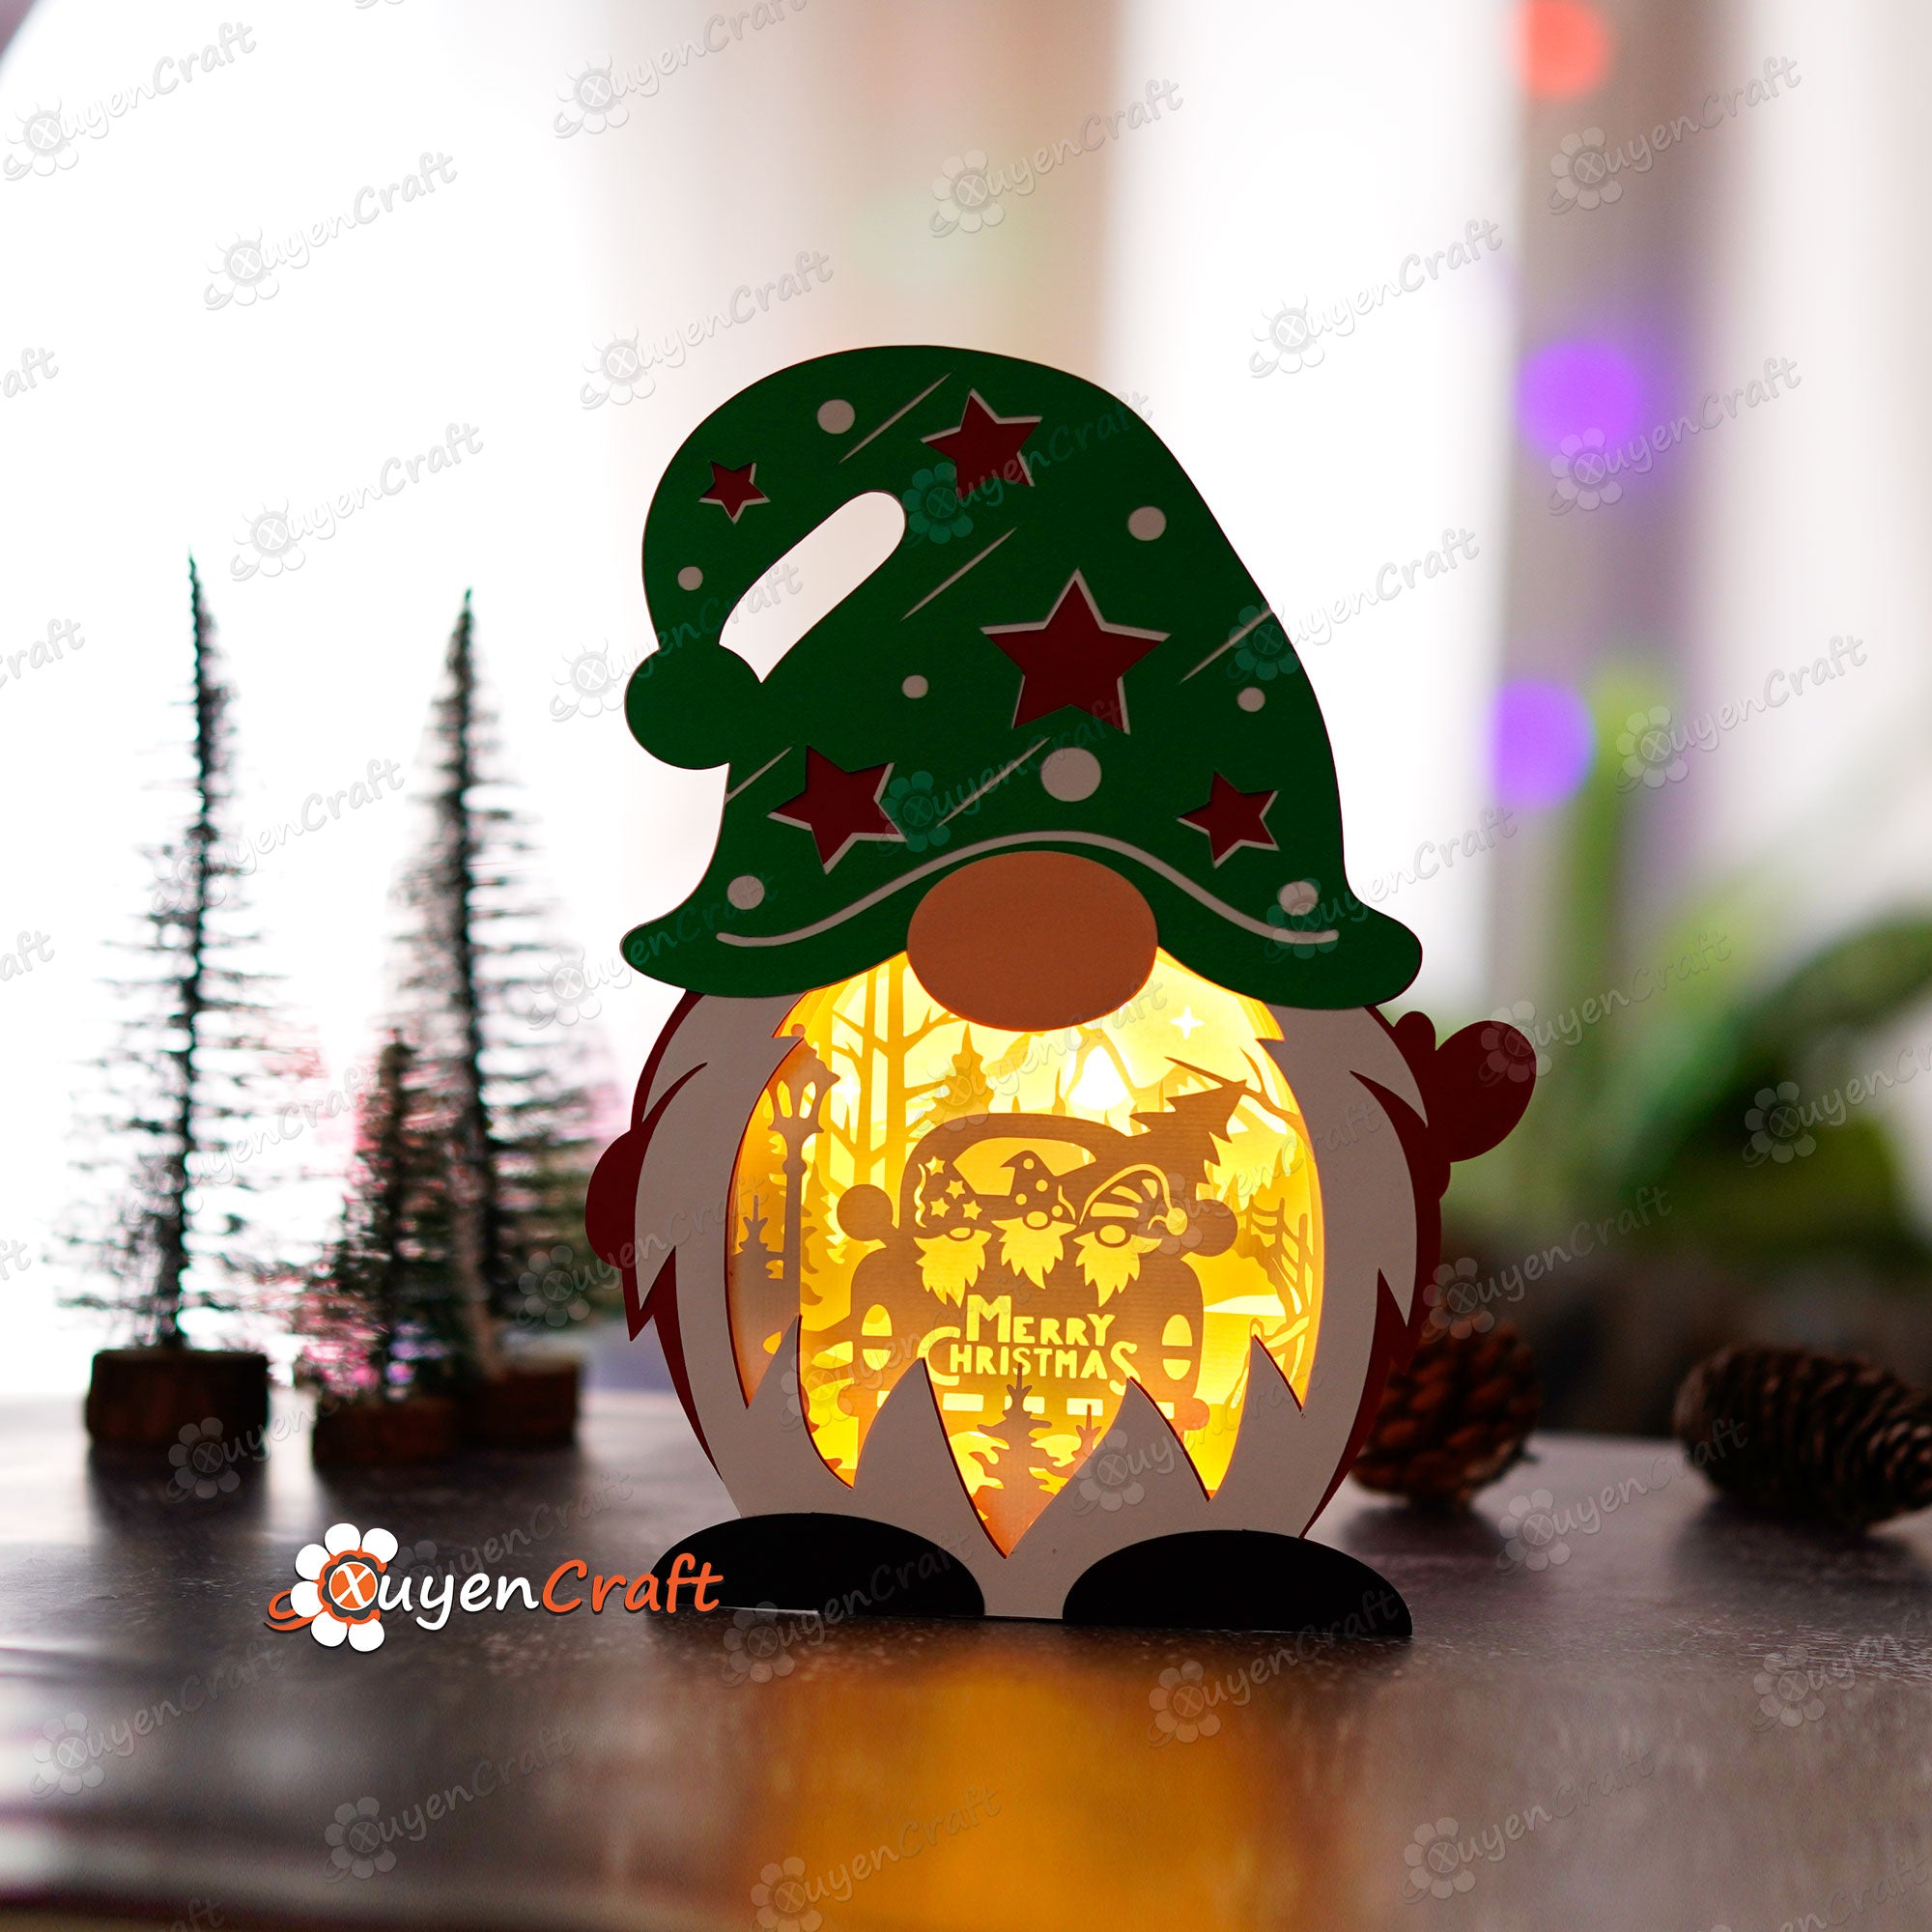 Pack 3 Christmas Gnome Shadow Box PDF, SVG Light Box for Cricut Projects - DIY Gnome Lantern with Christmas Truck, Santa, Deer Scene